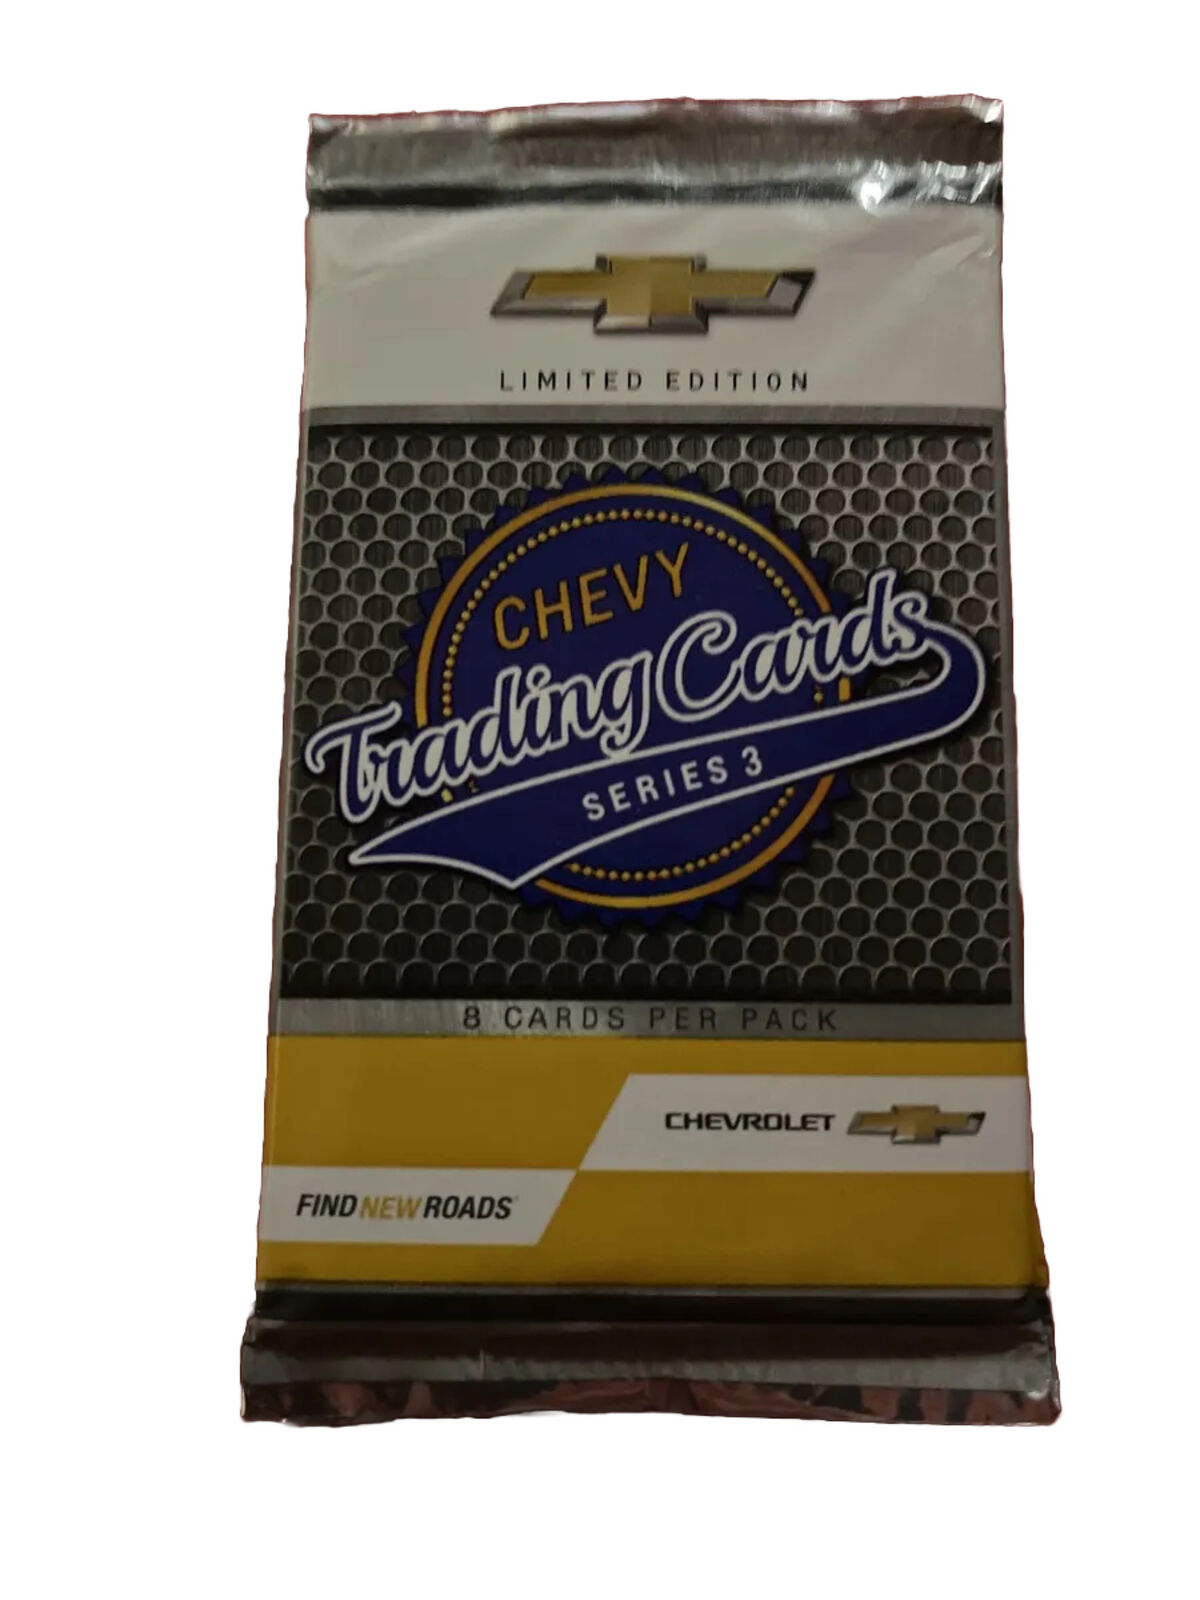 Chevy Trading Cards Series 3 Unopened Limited Edition